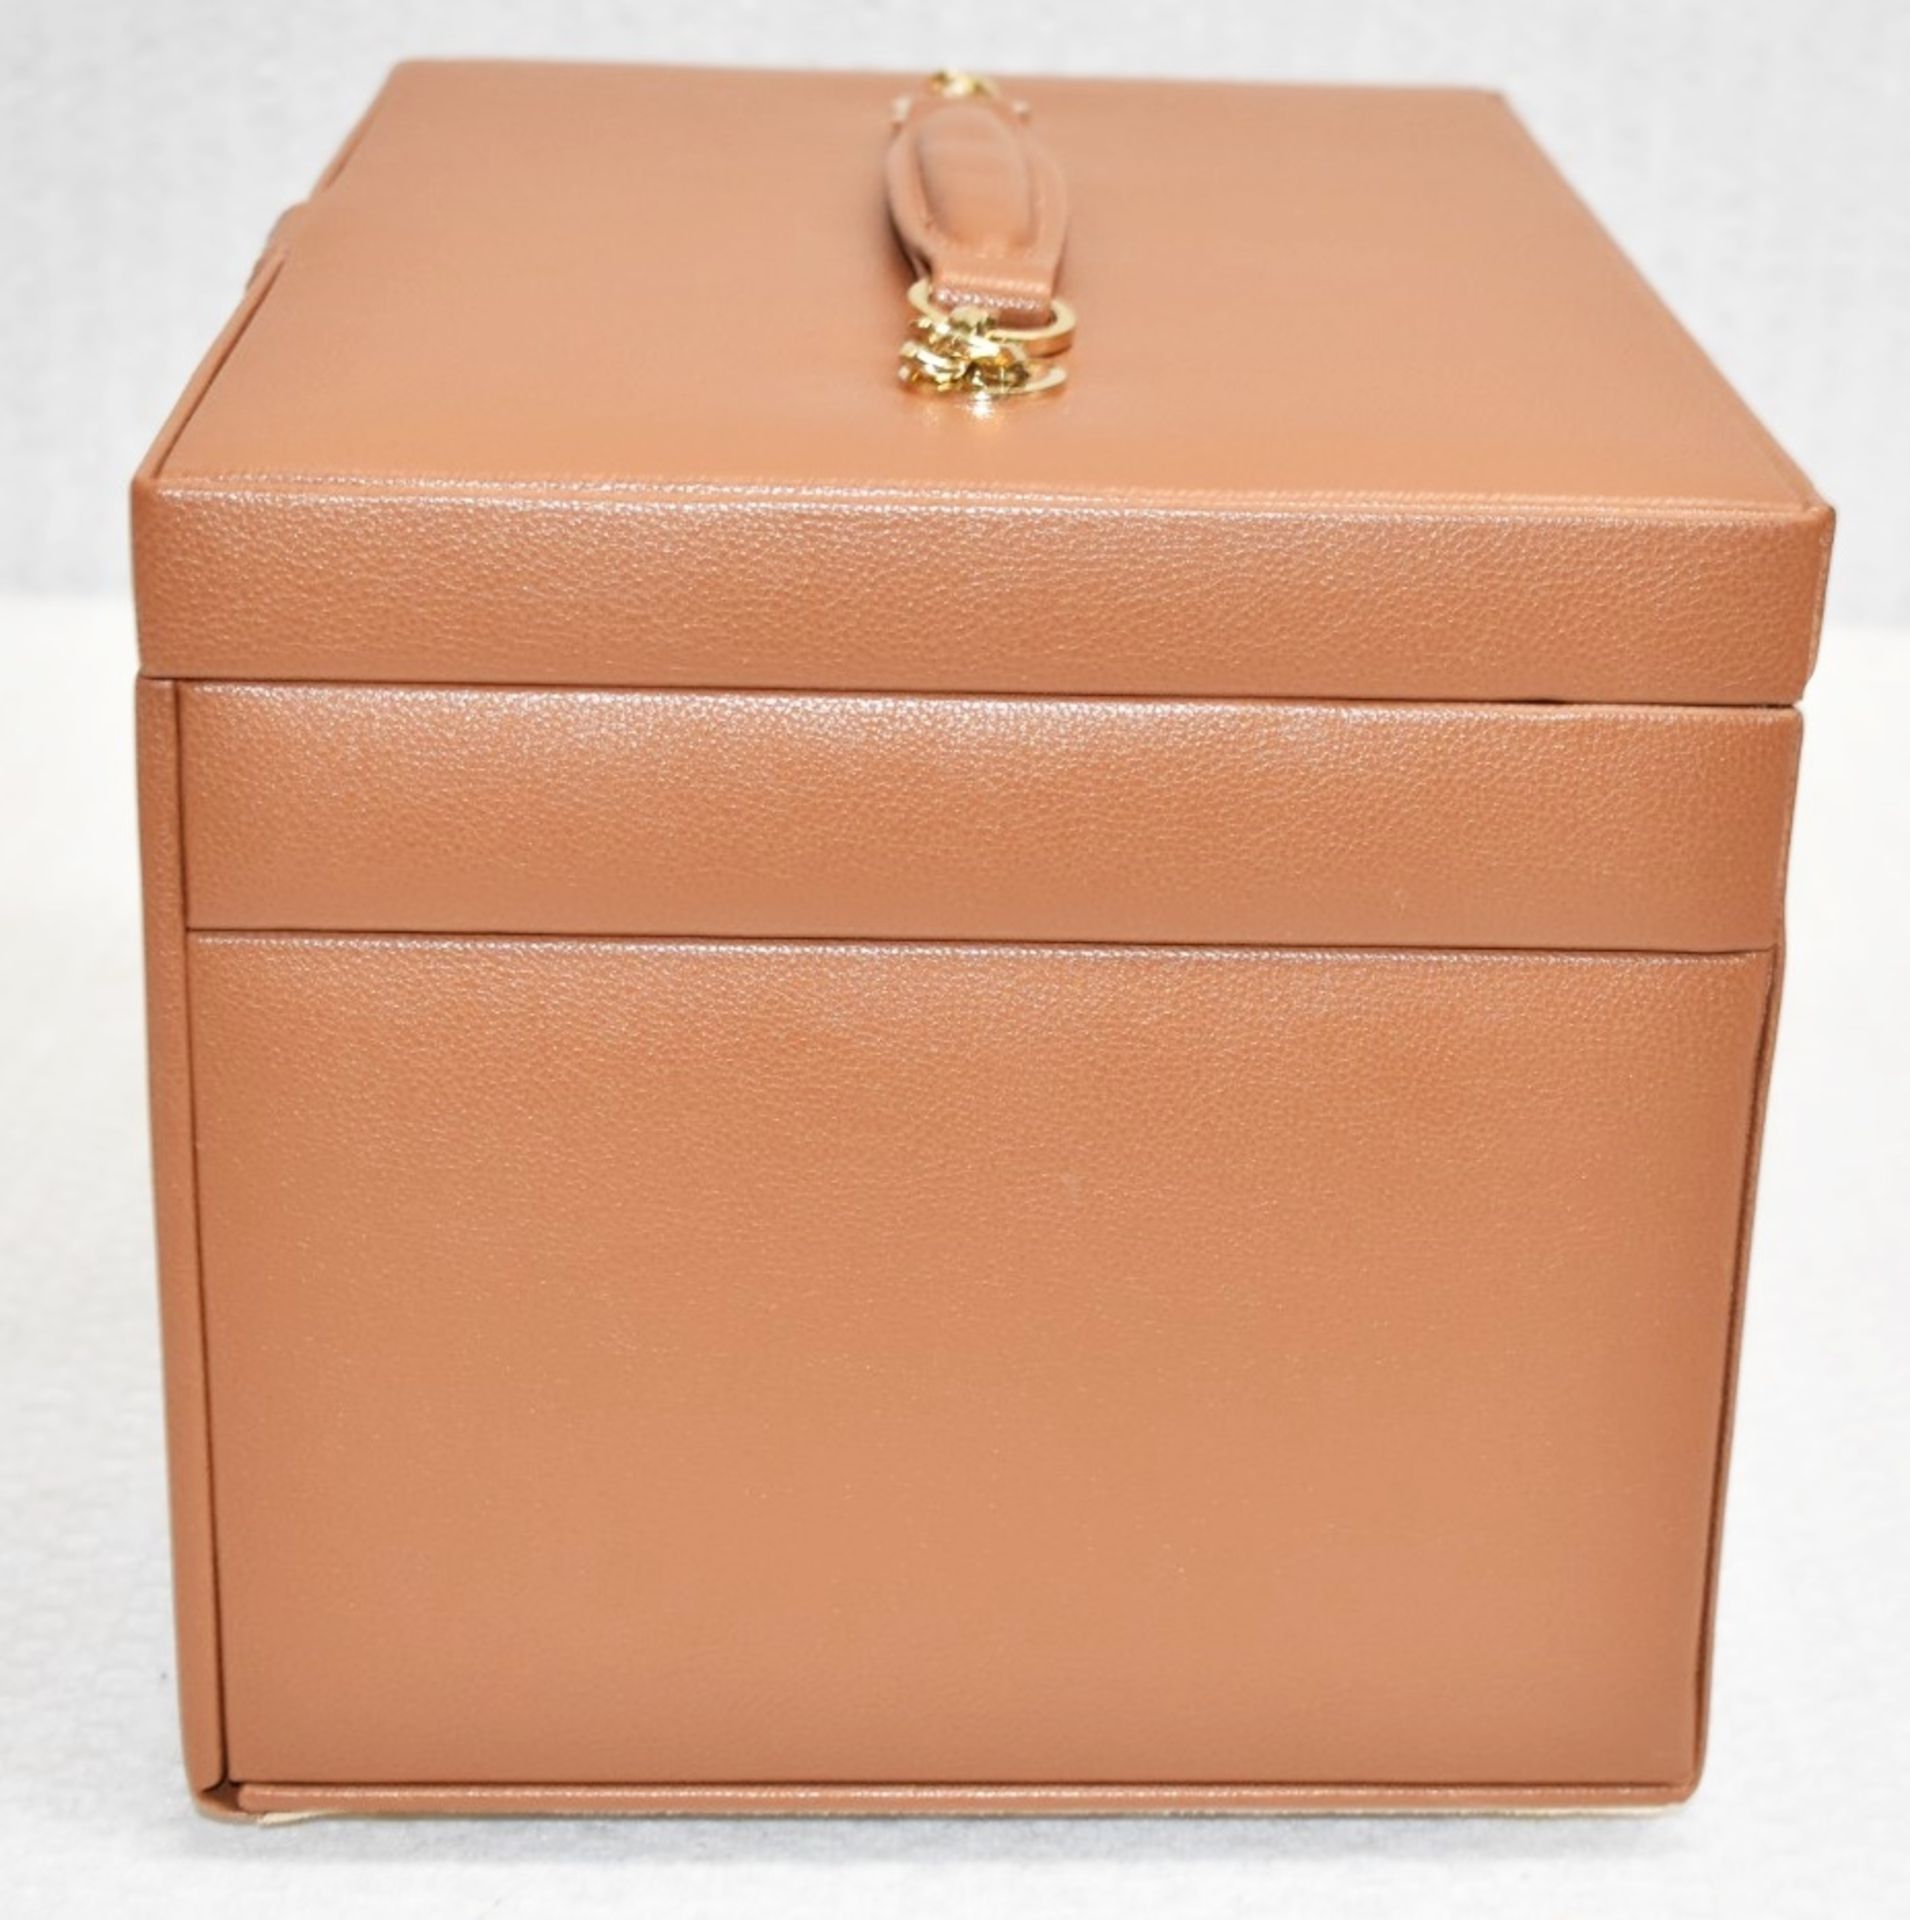 1 x WOLF 'Cassandra' Luxury Leather Upholstered Jewellery Case With Suede Lining - RRP £605.00 - Image 8 of 9